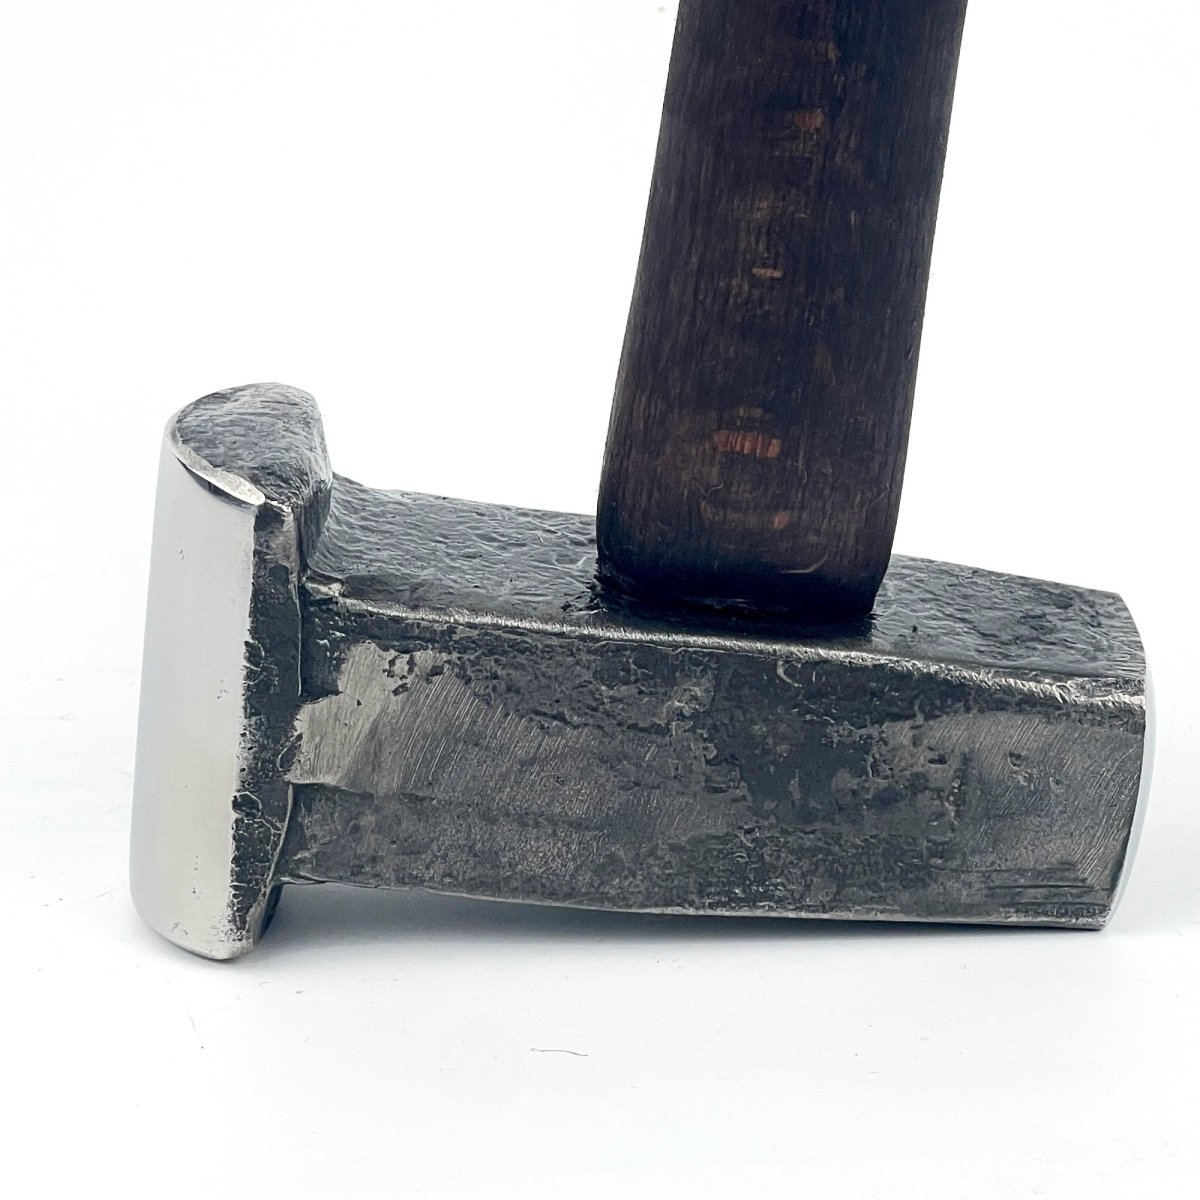 Top fuller hammer for blacksmiths 2.5lbs from AncientSmithy